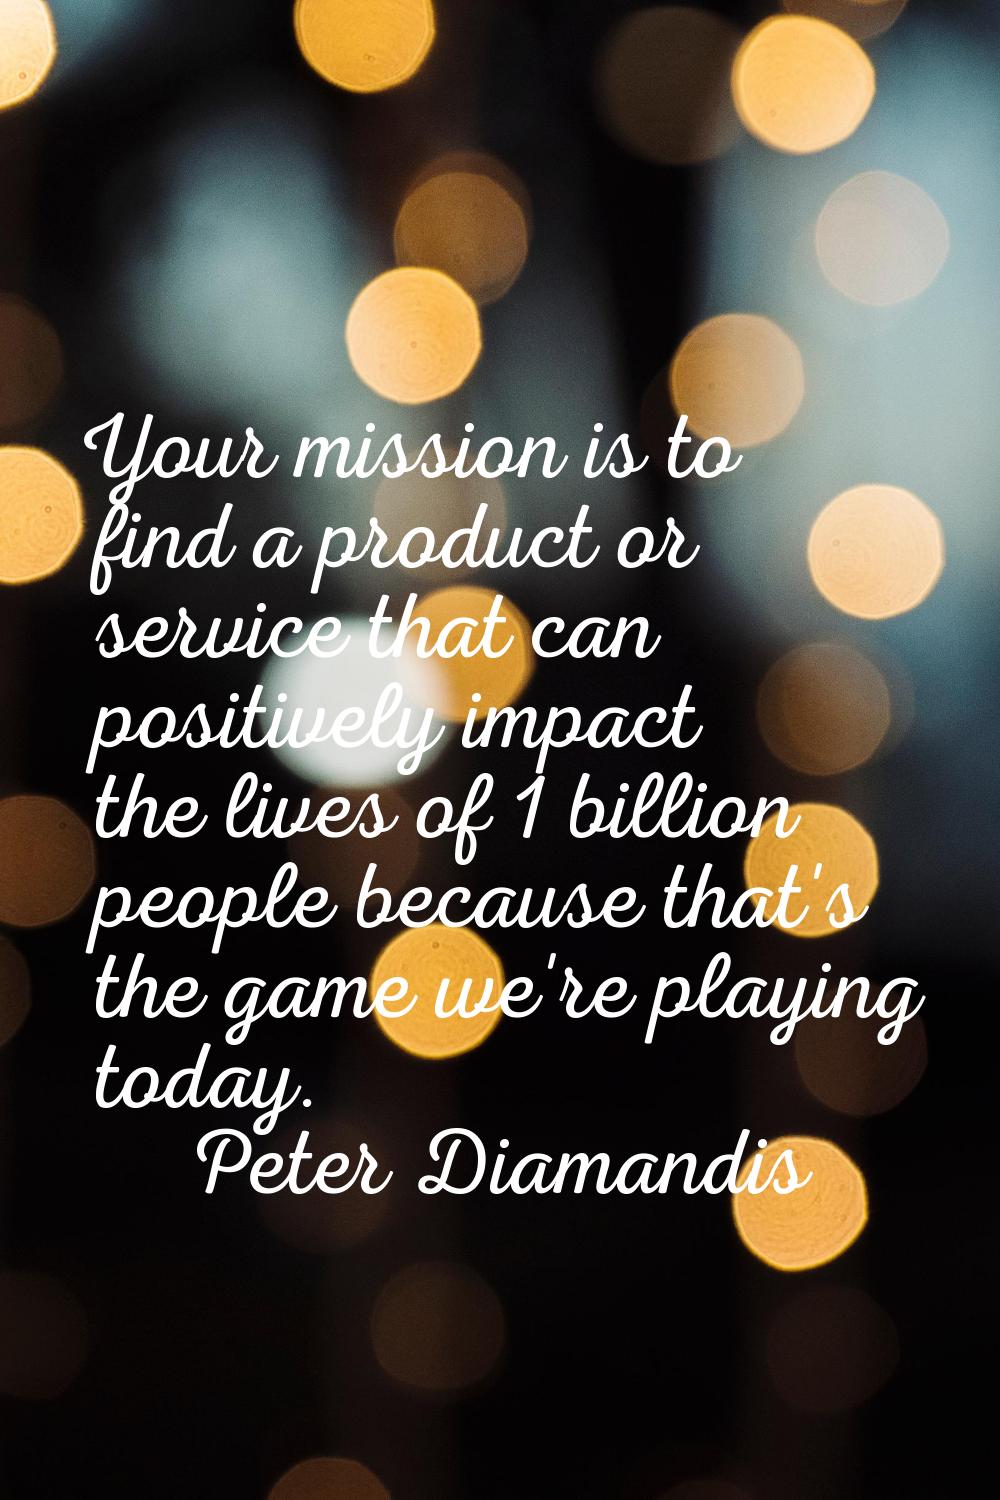 Your mission is to find a product or service that can positively impact the lives of 1 billion peop